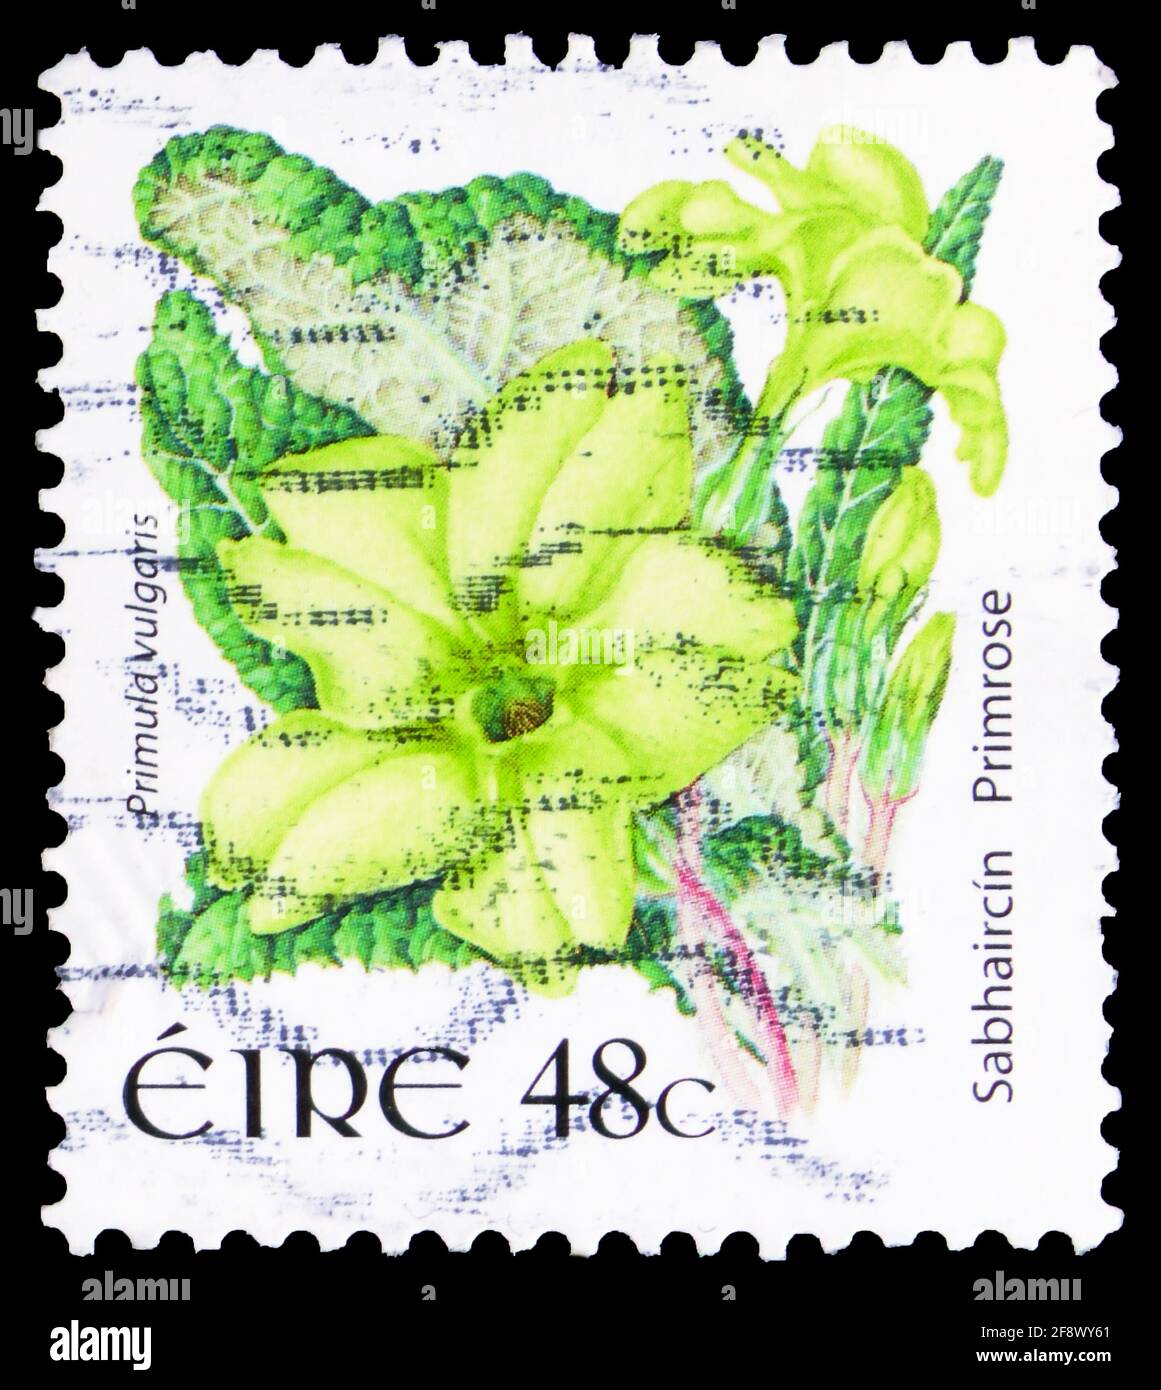 MOSCOW, RUSSIA - OCTOBER 1, 2019: Postage stamp printed in Ireland shows Primrose - Primula vulgaris, Wild Flowers Definitives serie, circa 2004 Stock Photo